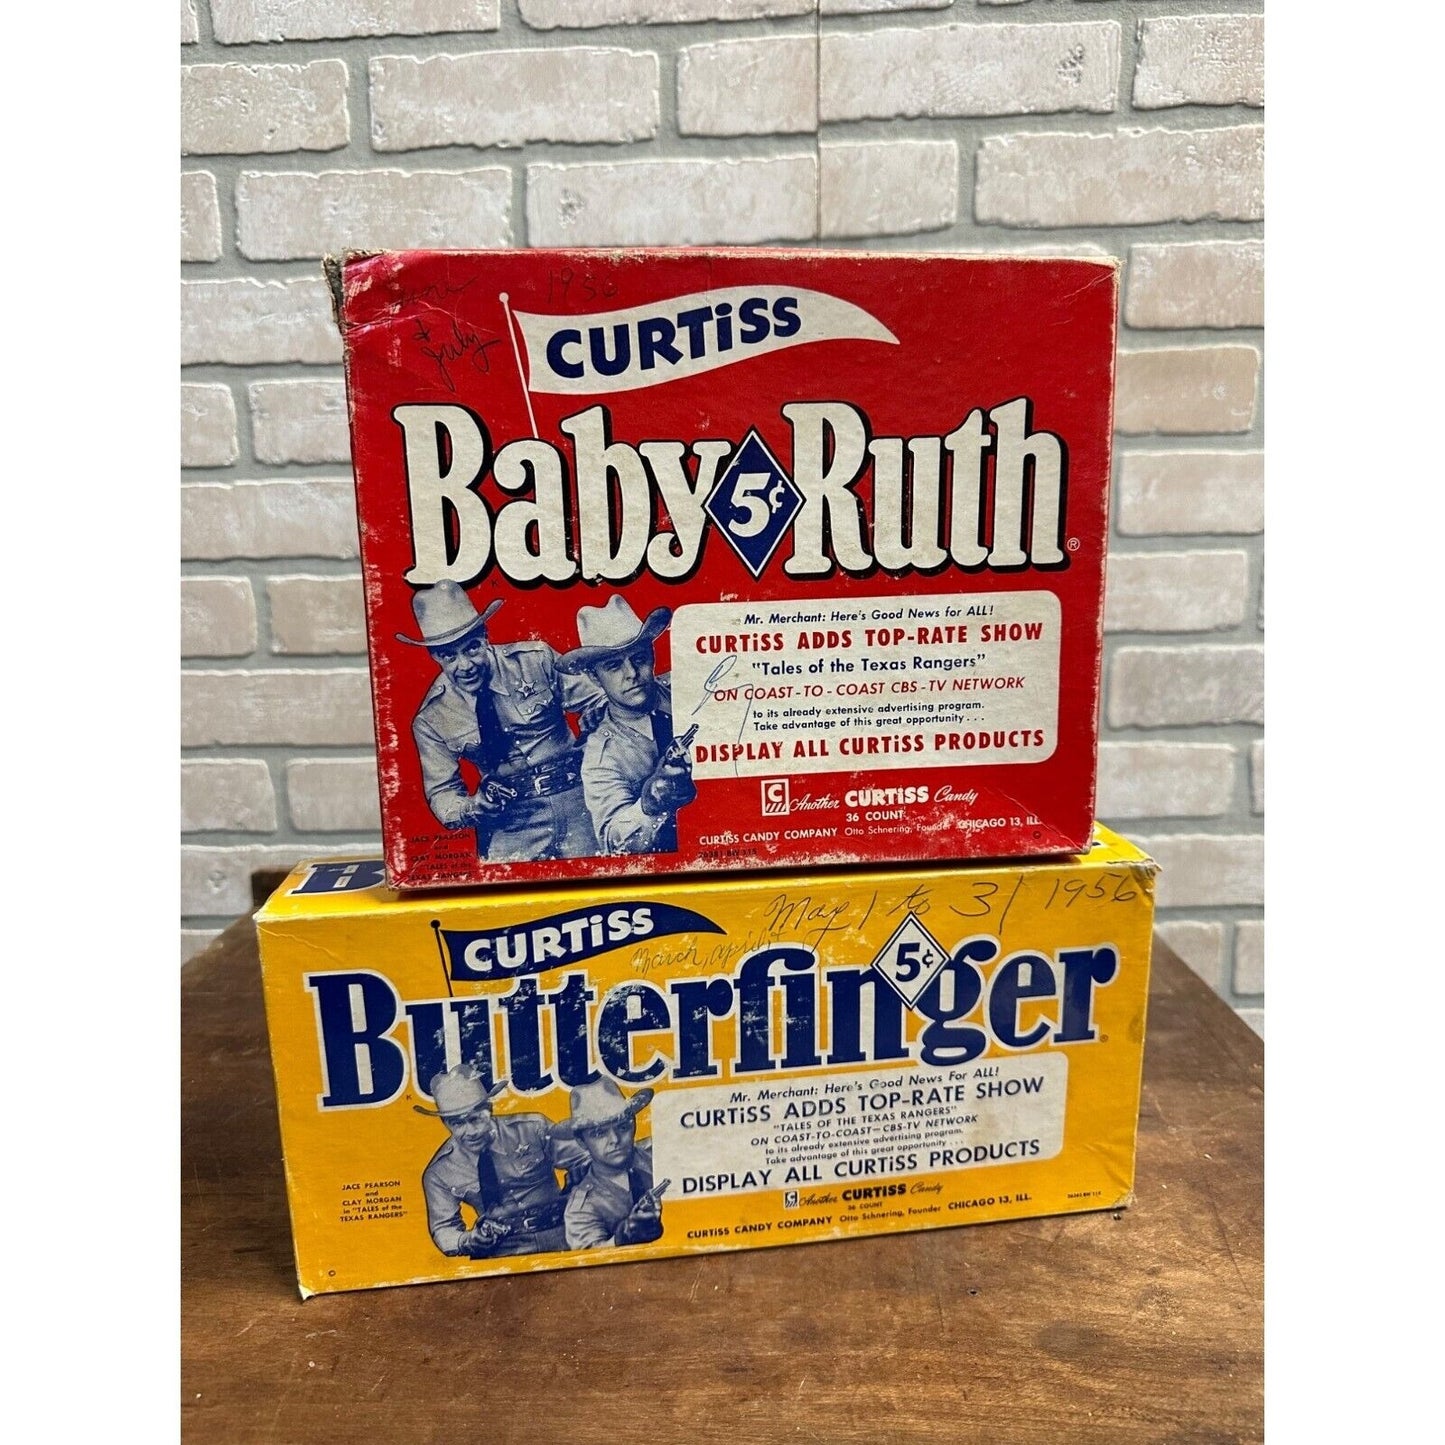 Vintage 1950s Curtiss Baby Ruth & Butterfinger Candy Boxes TV Show Texas Rangers